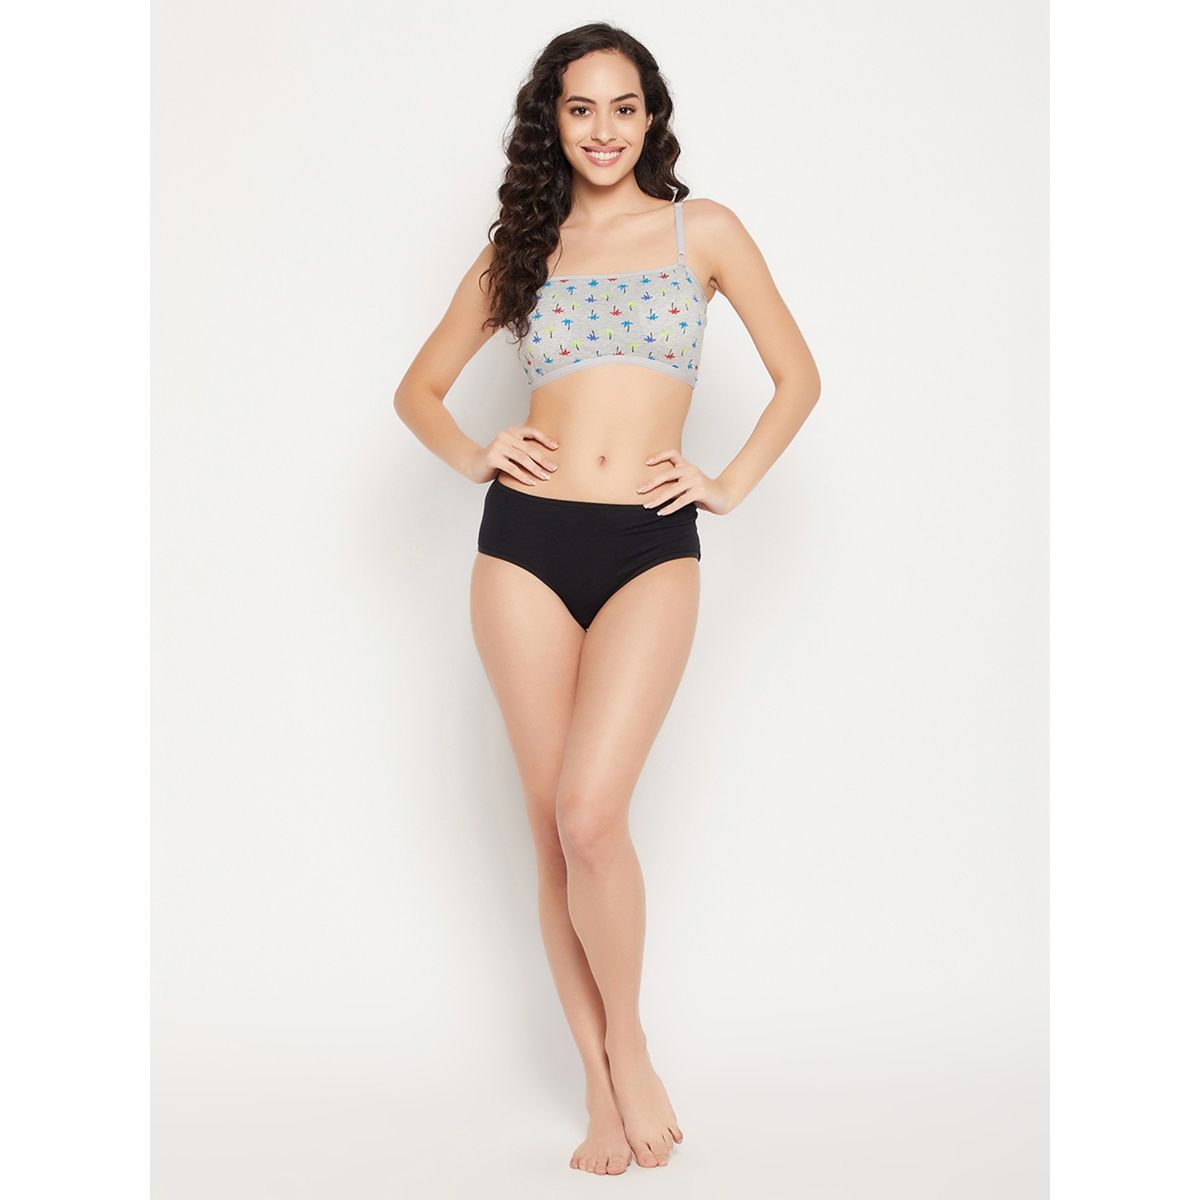 Buy Padded Non-Wired Full Cup Palm Tree Print Teenage Bra in Light Grey  with Removable Pads - Cotton Online India, Best Prices, COD - Clovia -  BB0023B01